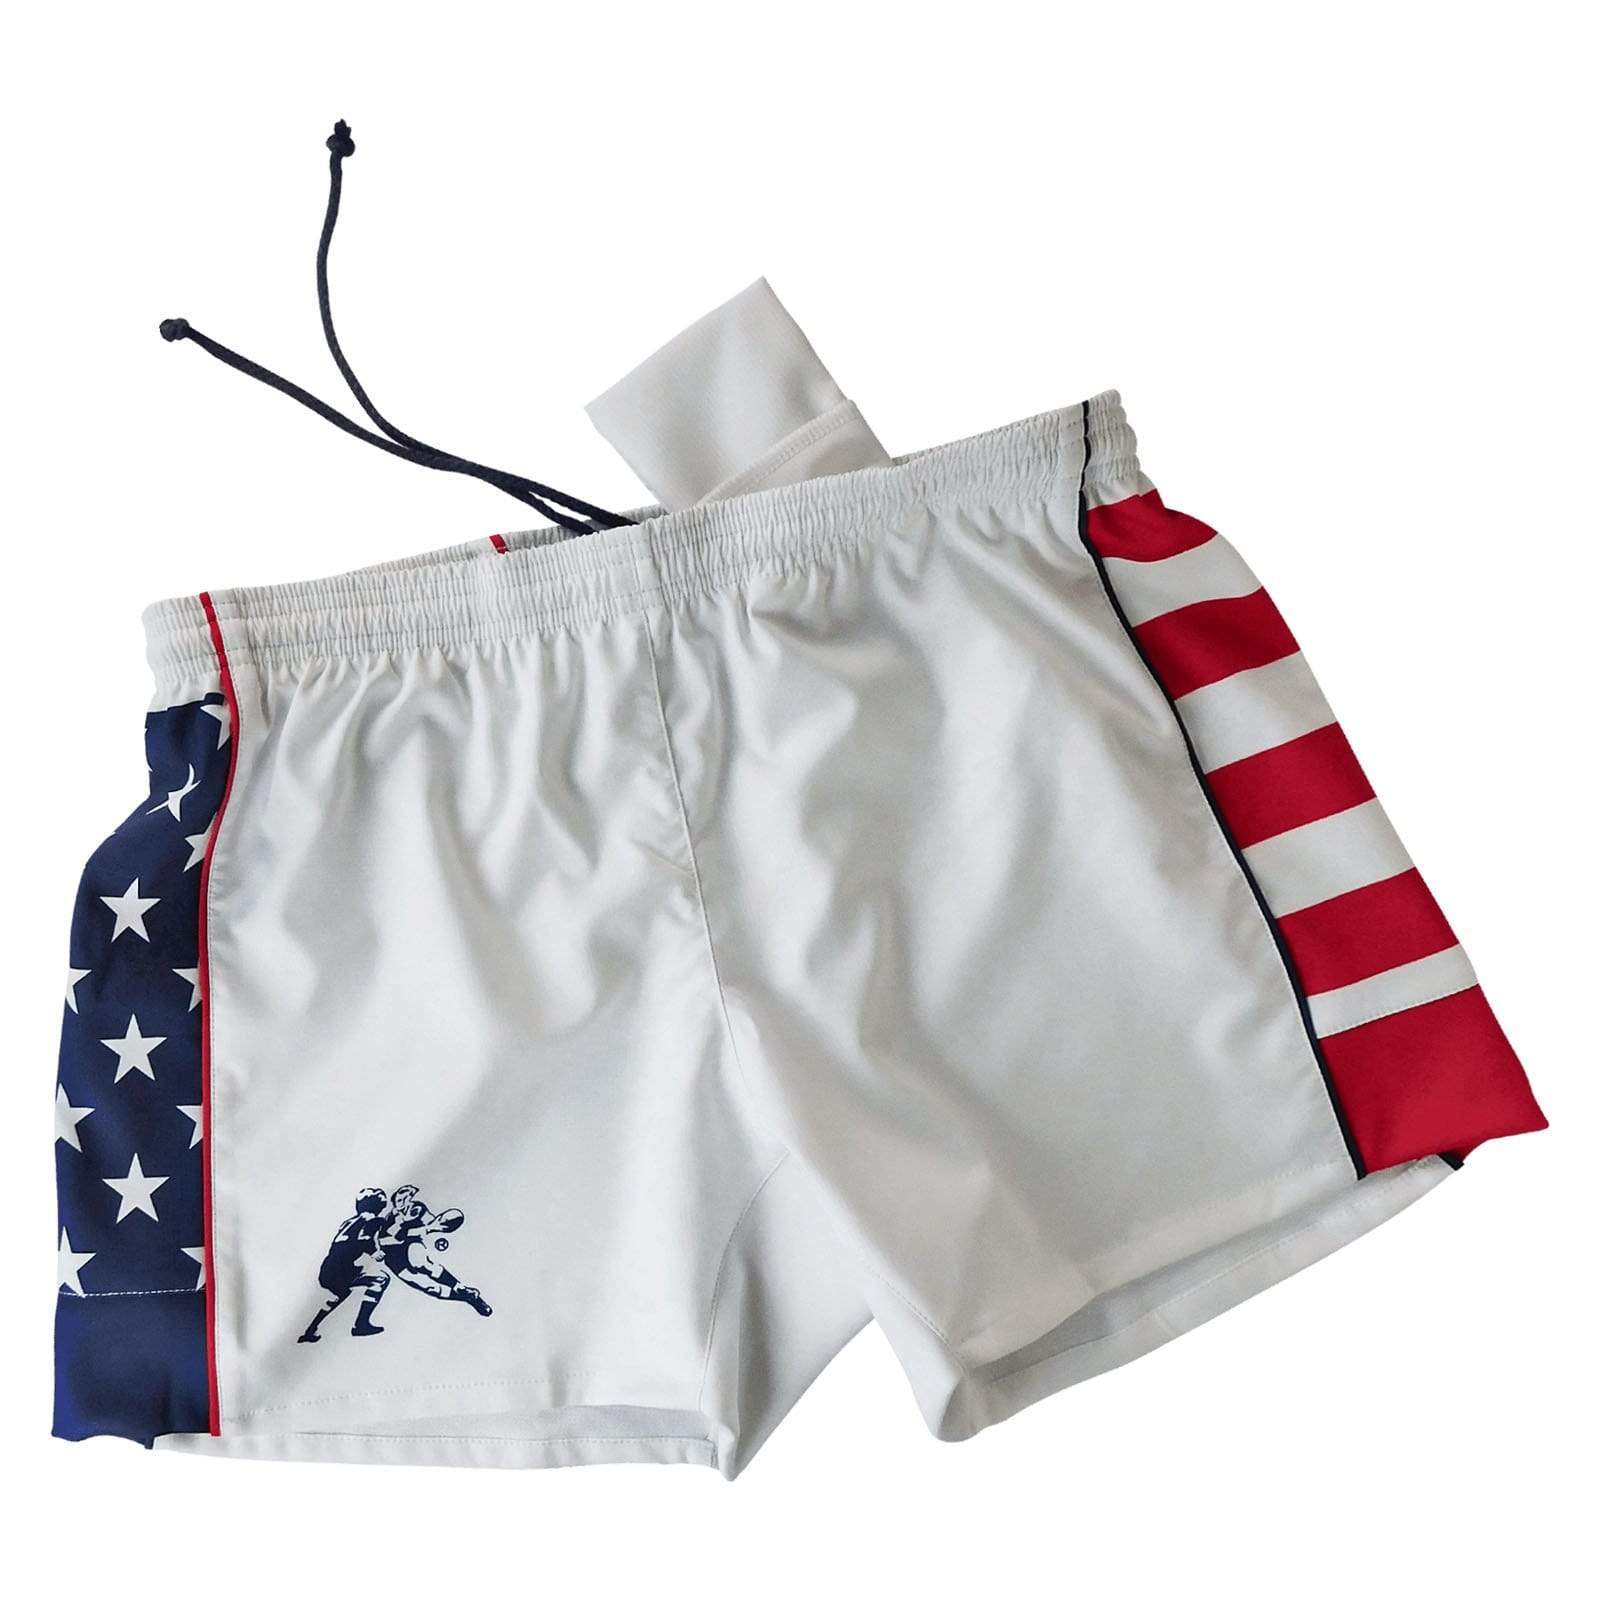 Rugby Imports USA Pro XV Rugby Shorts